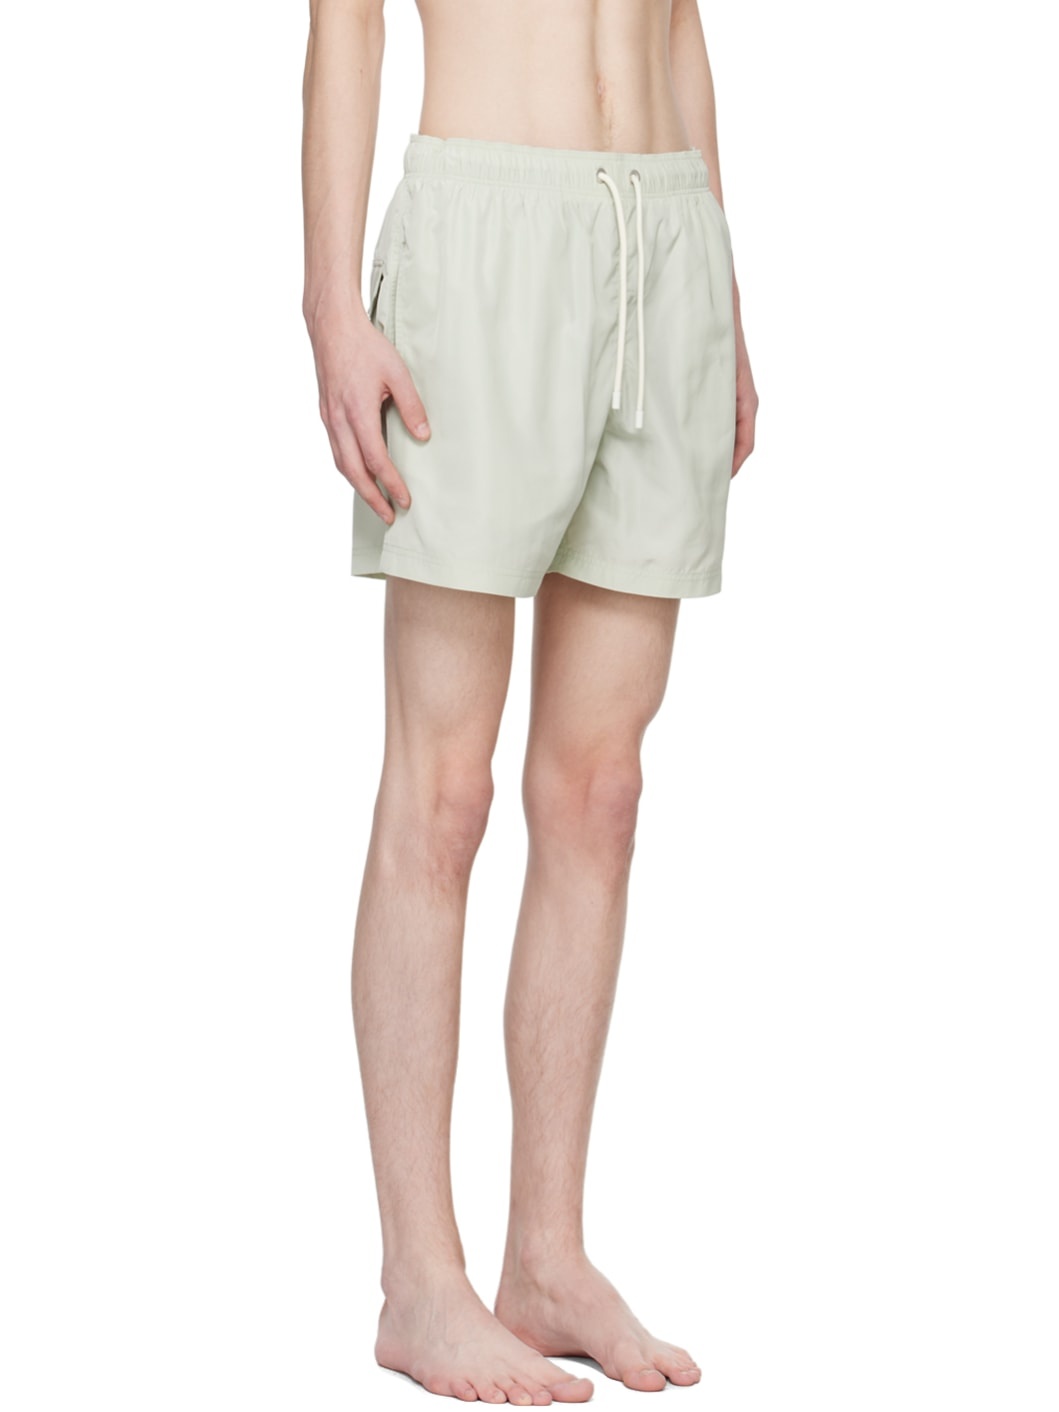 Green Embroidered Swim Shorts - 2